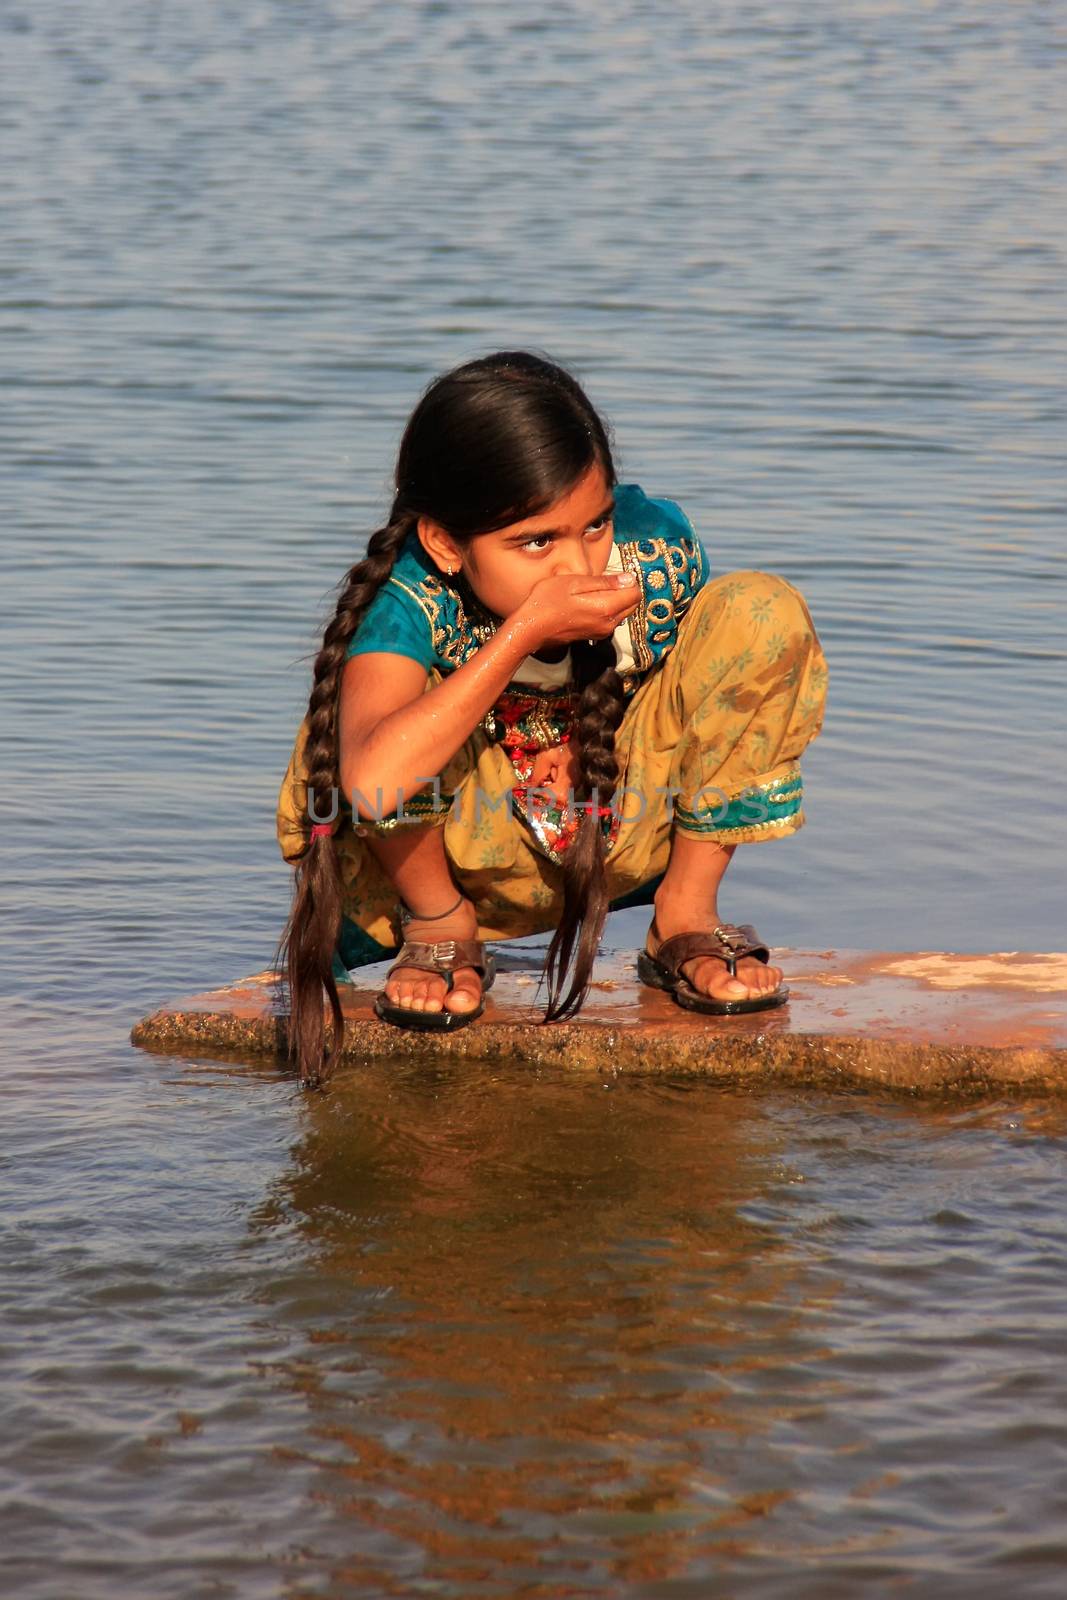 Local girl drinking from water reservoir, Khichan village, India by donya_nedomam